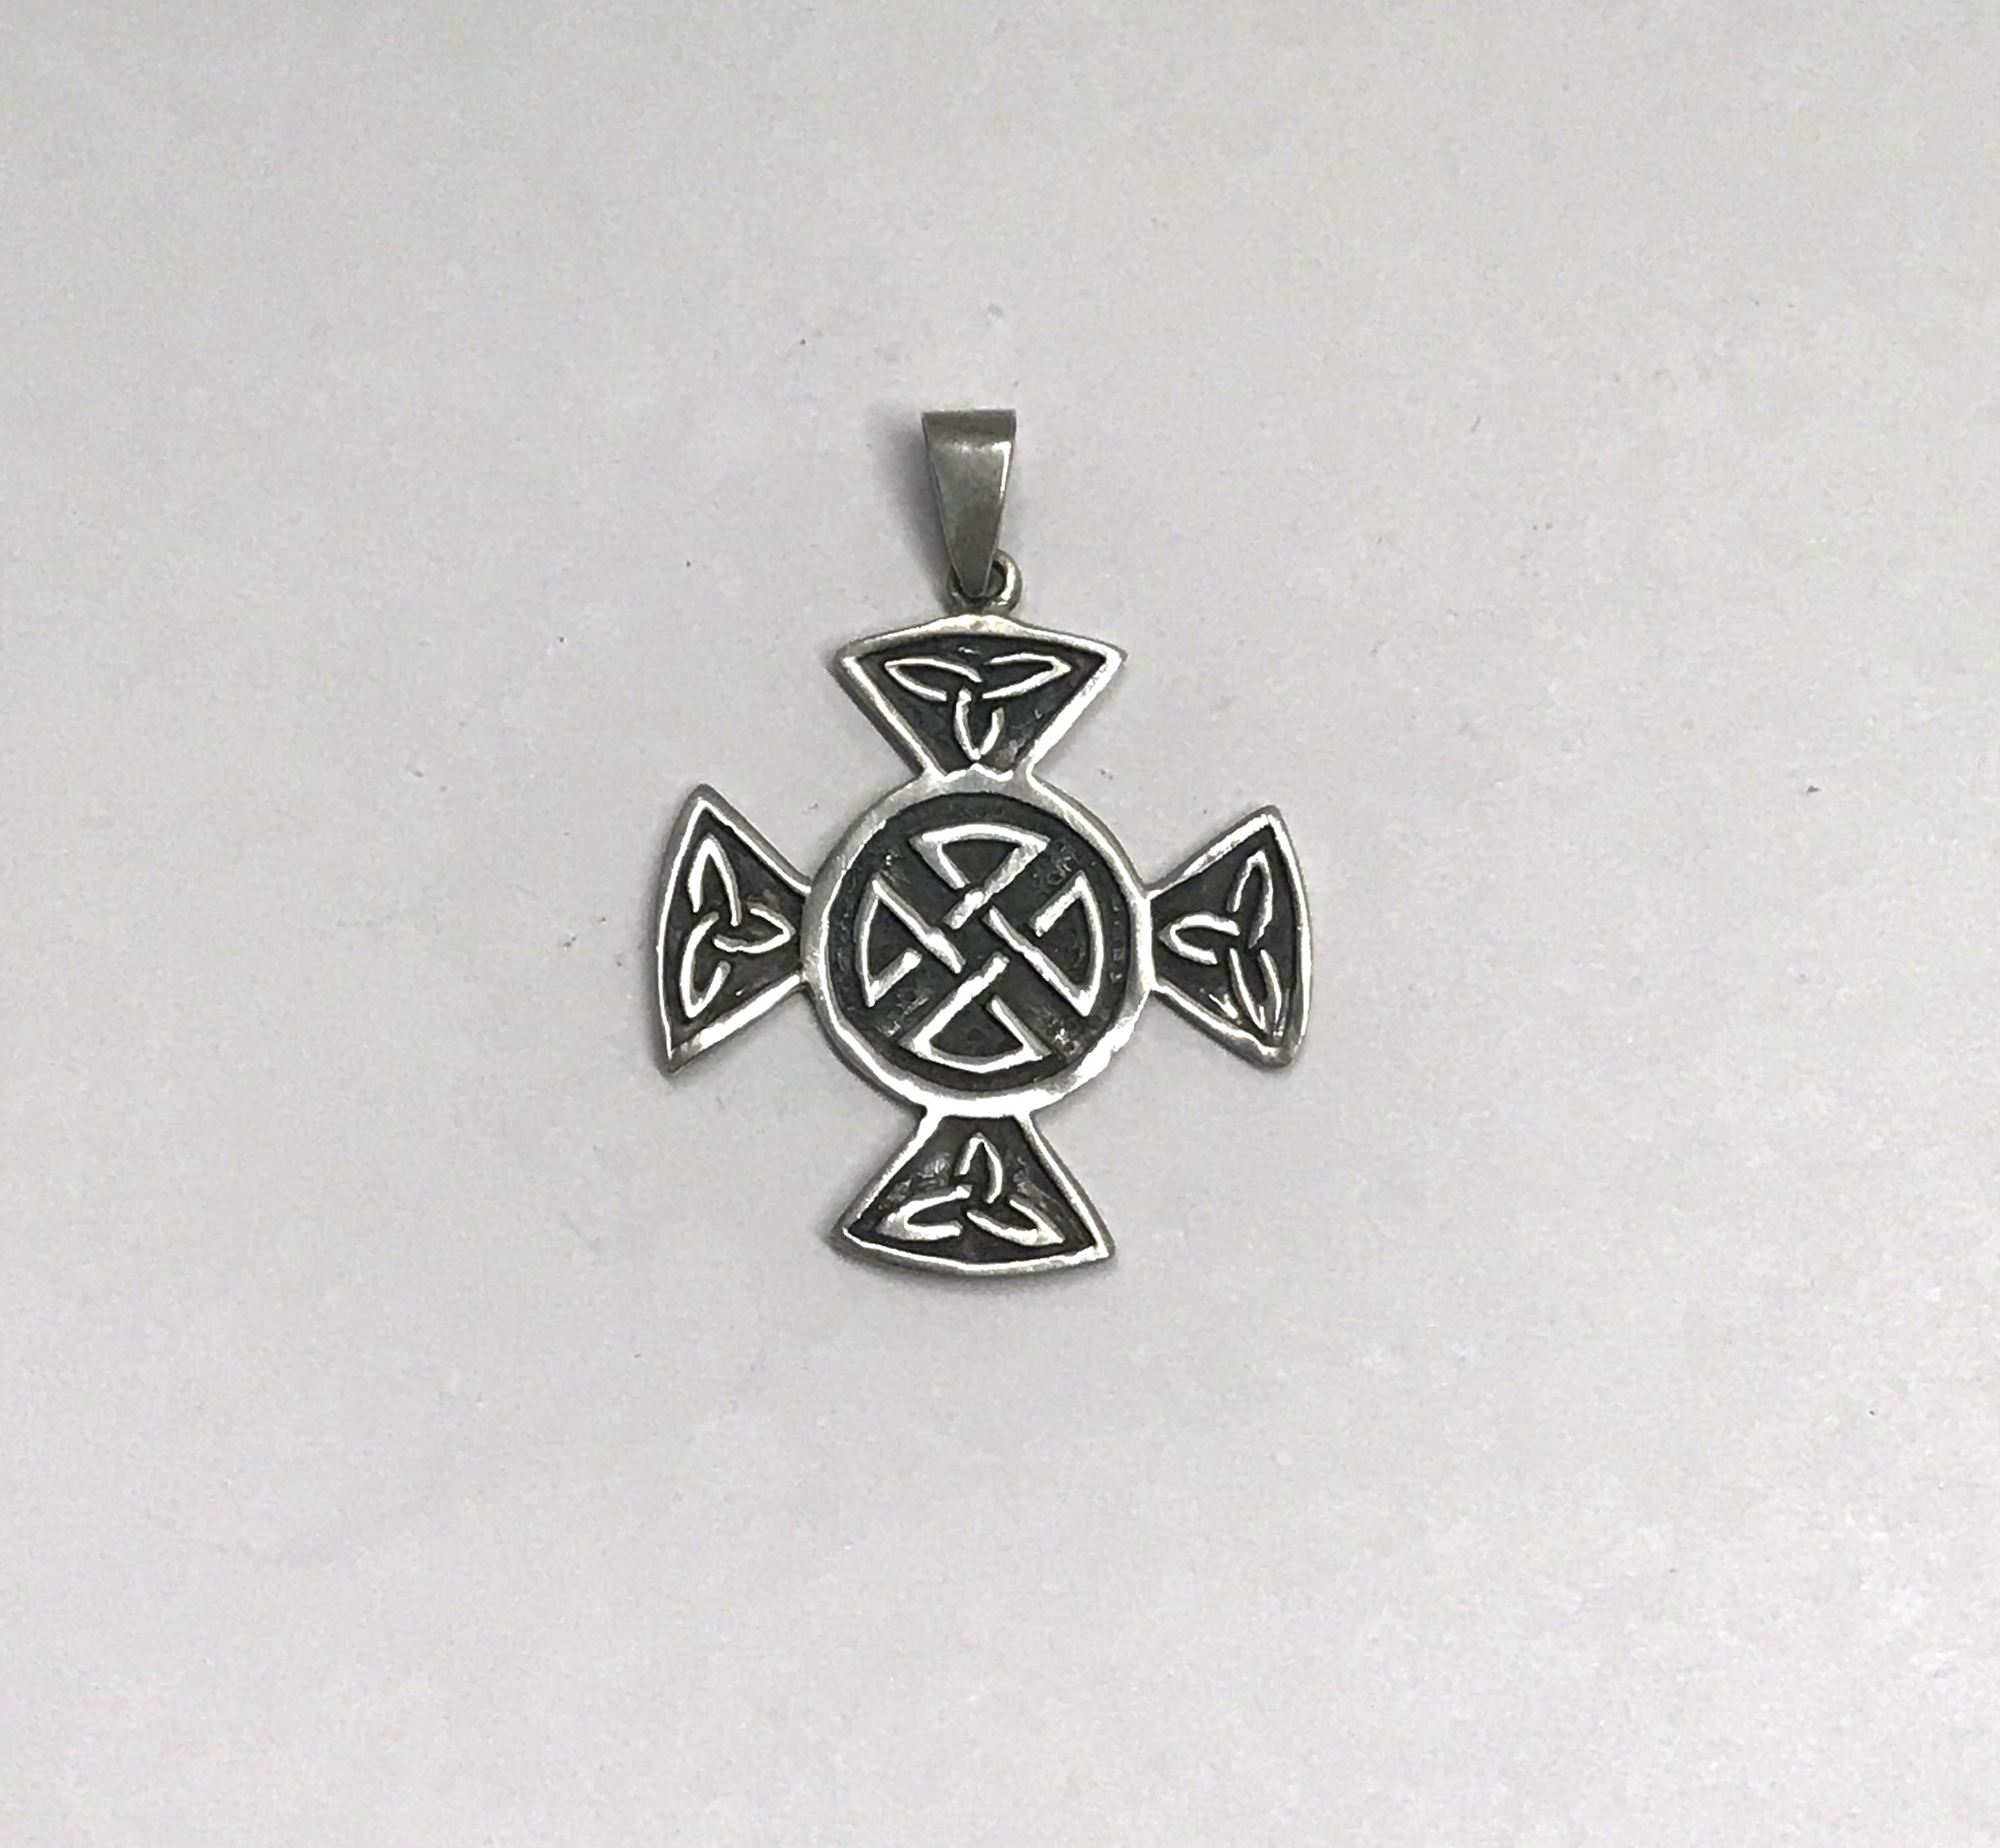 www.hersandhistreasures.com/products/Celtic-Cross-Trinity-Knot-Sterling-Silver-Necklace-Pendant